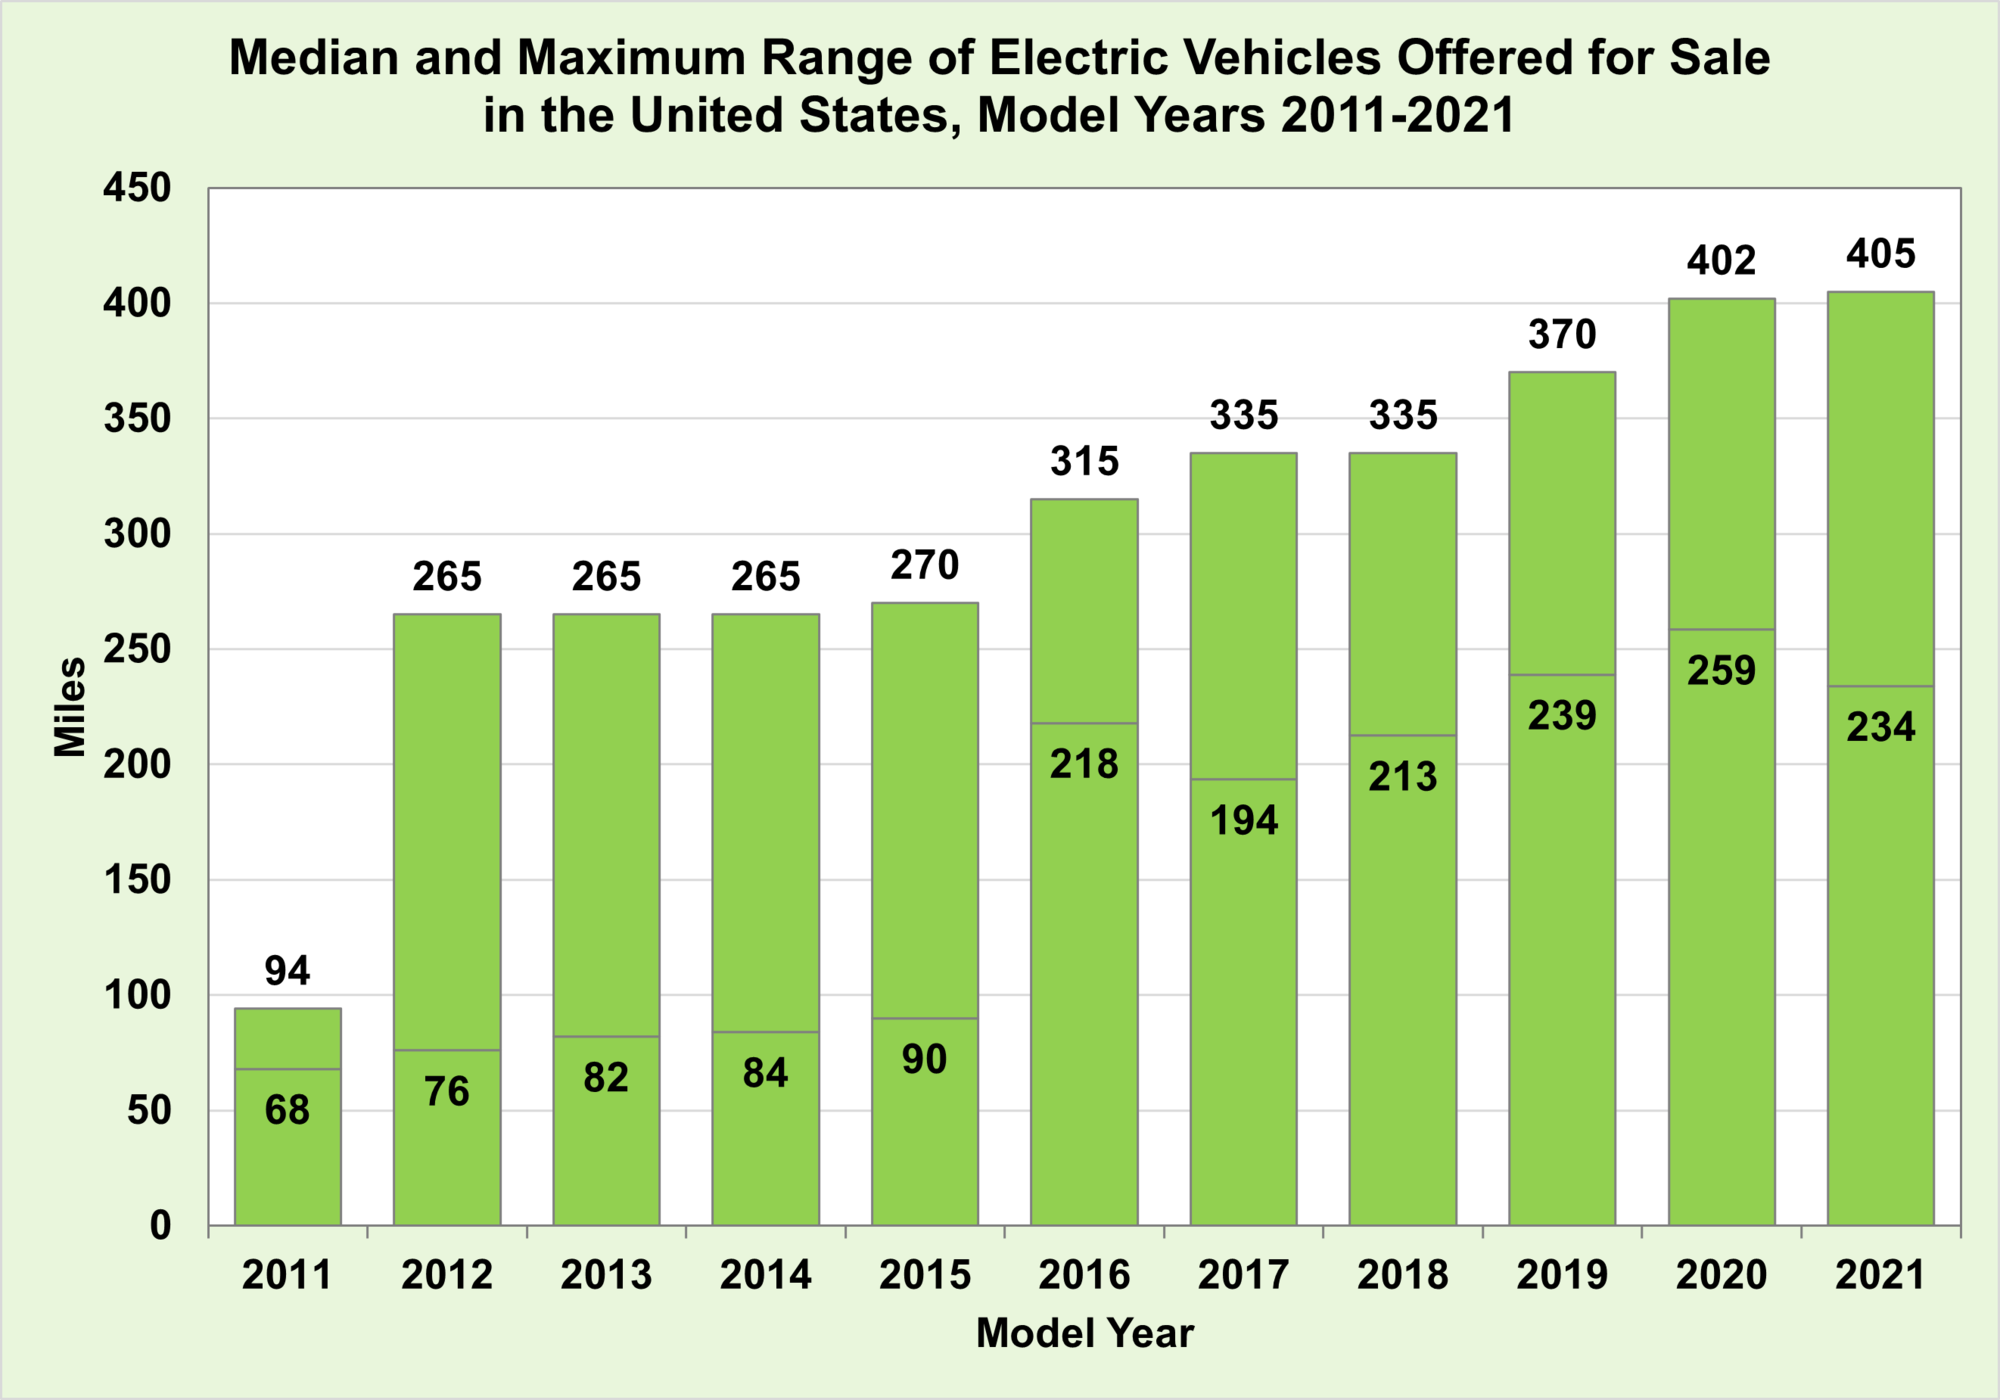 Median and Maximum Range of Electric Vehicles Offered for Sale in the United States, Model Years 2011-2021